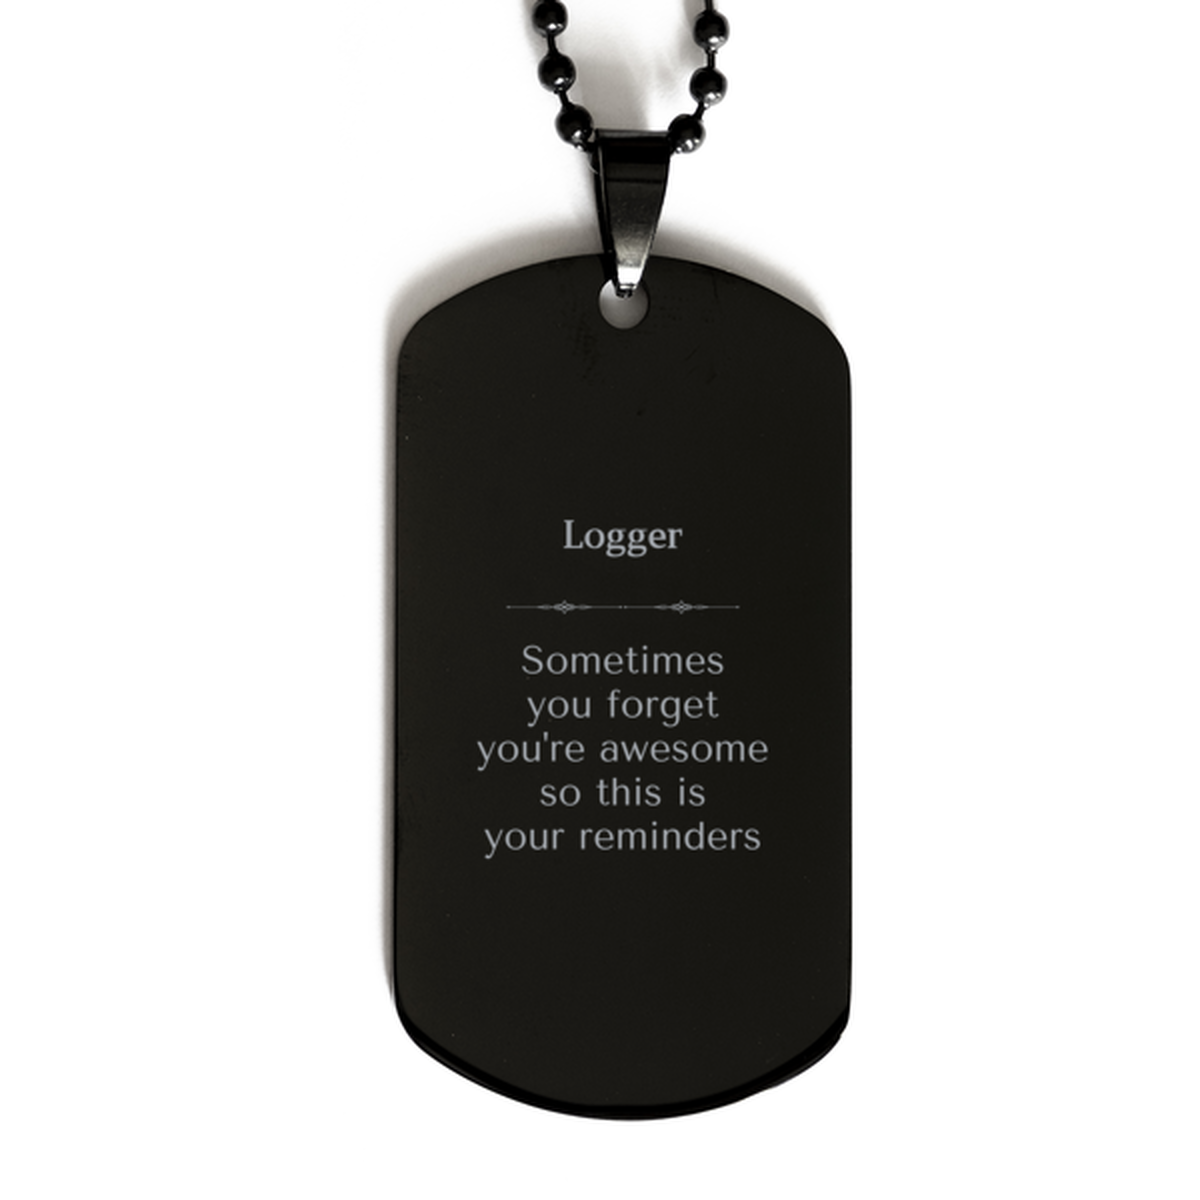 Sentimental Logger Black Dog Tag, Logger Sometimes you forget you're awesome so this is your reminders, Graduation Christmas Birthday Gifts for Logger, Men, Women, Coworkers